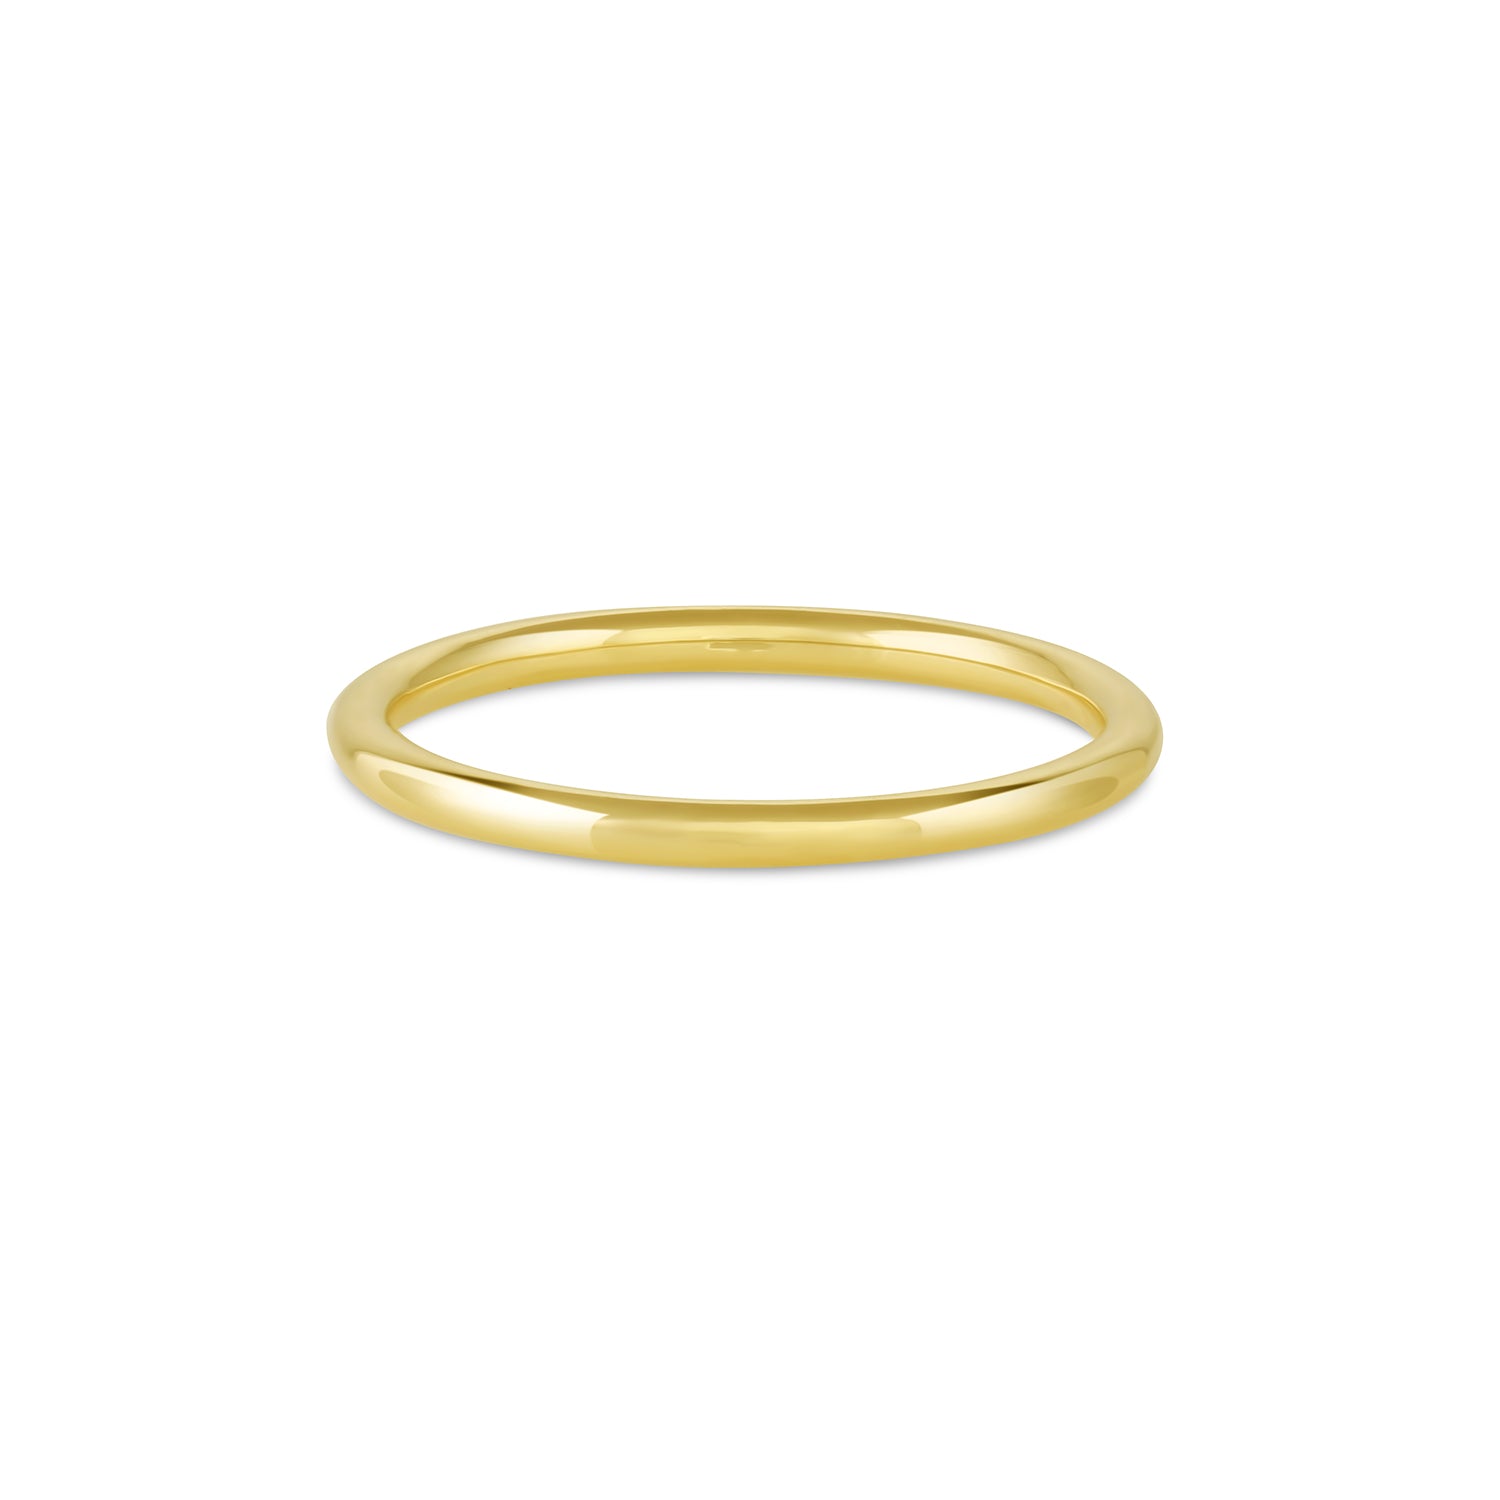 1.2mm Skinny Gold Band, 14k Gold Ring, Hammered Gold Band, Thin Wedding  Ring, Wedding Jewelry